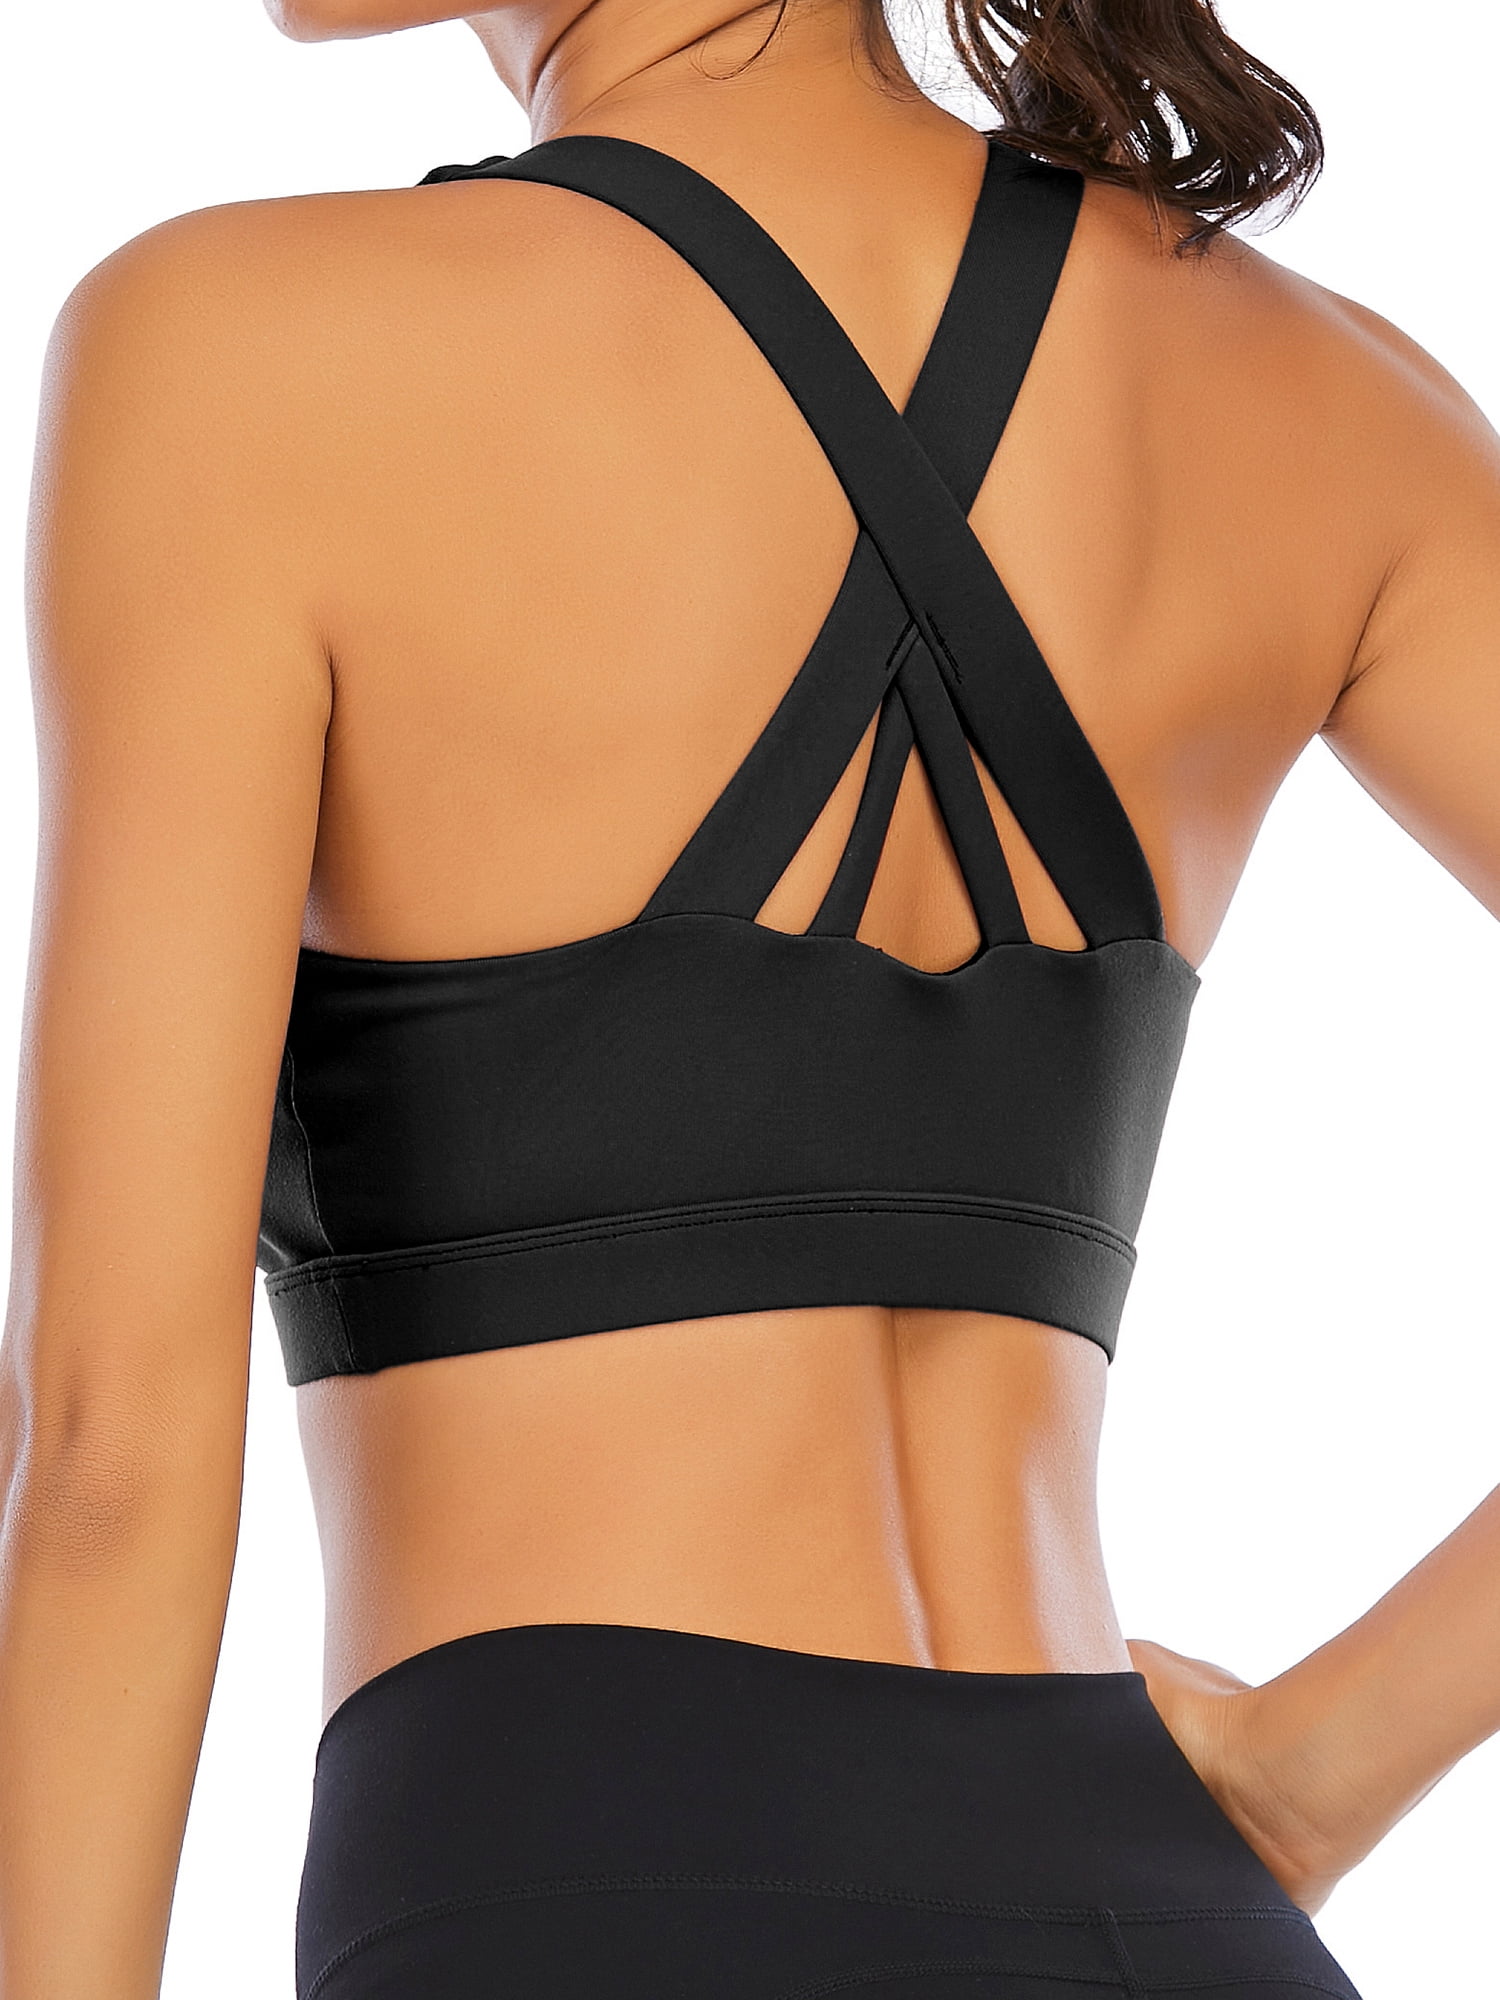 Junlan Lace Trim Cross Front Removable Cups Light Support Yoga Sports Bra Black 